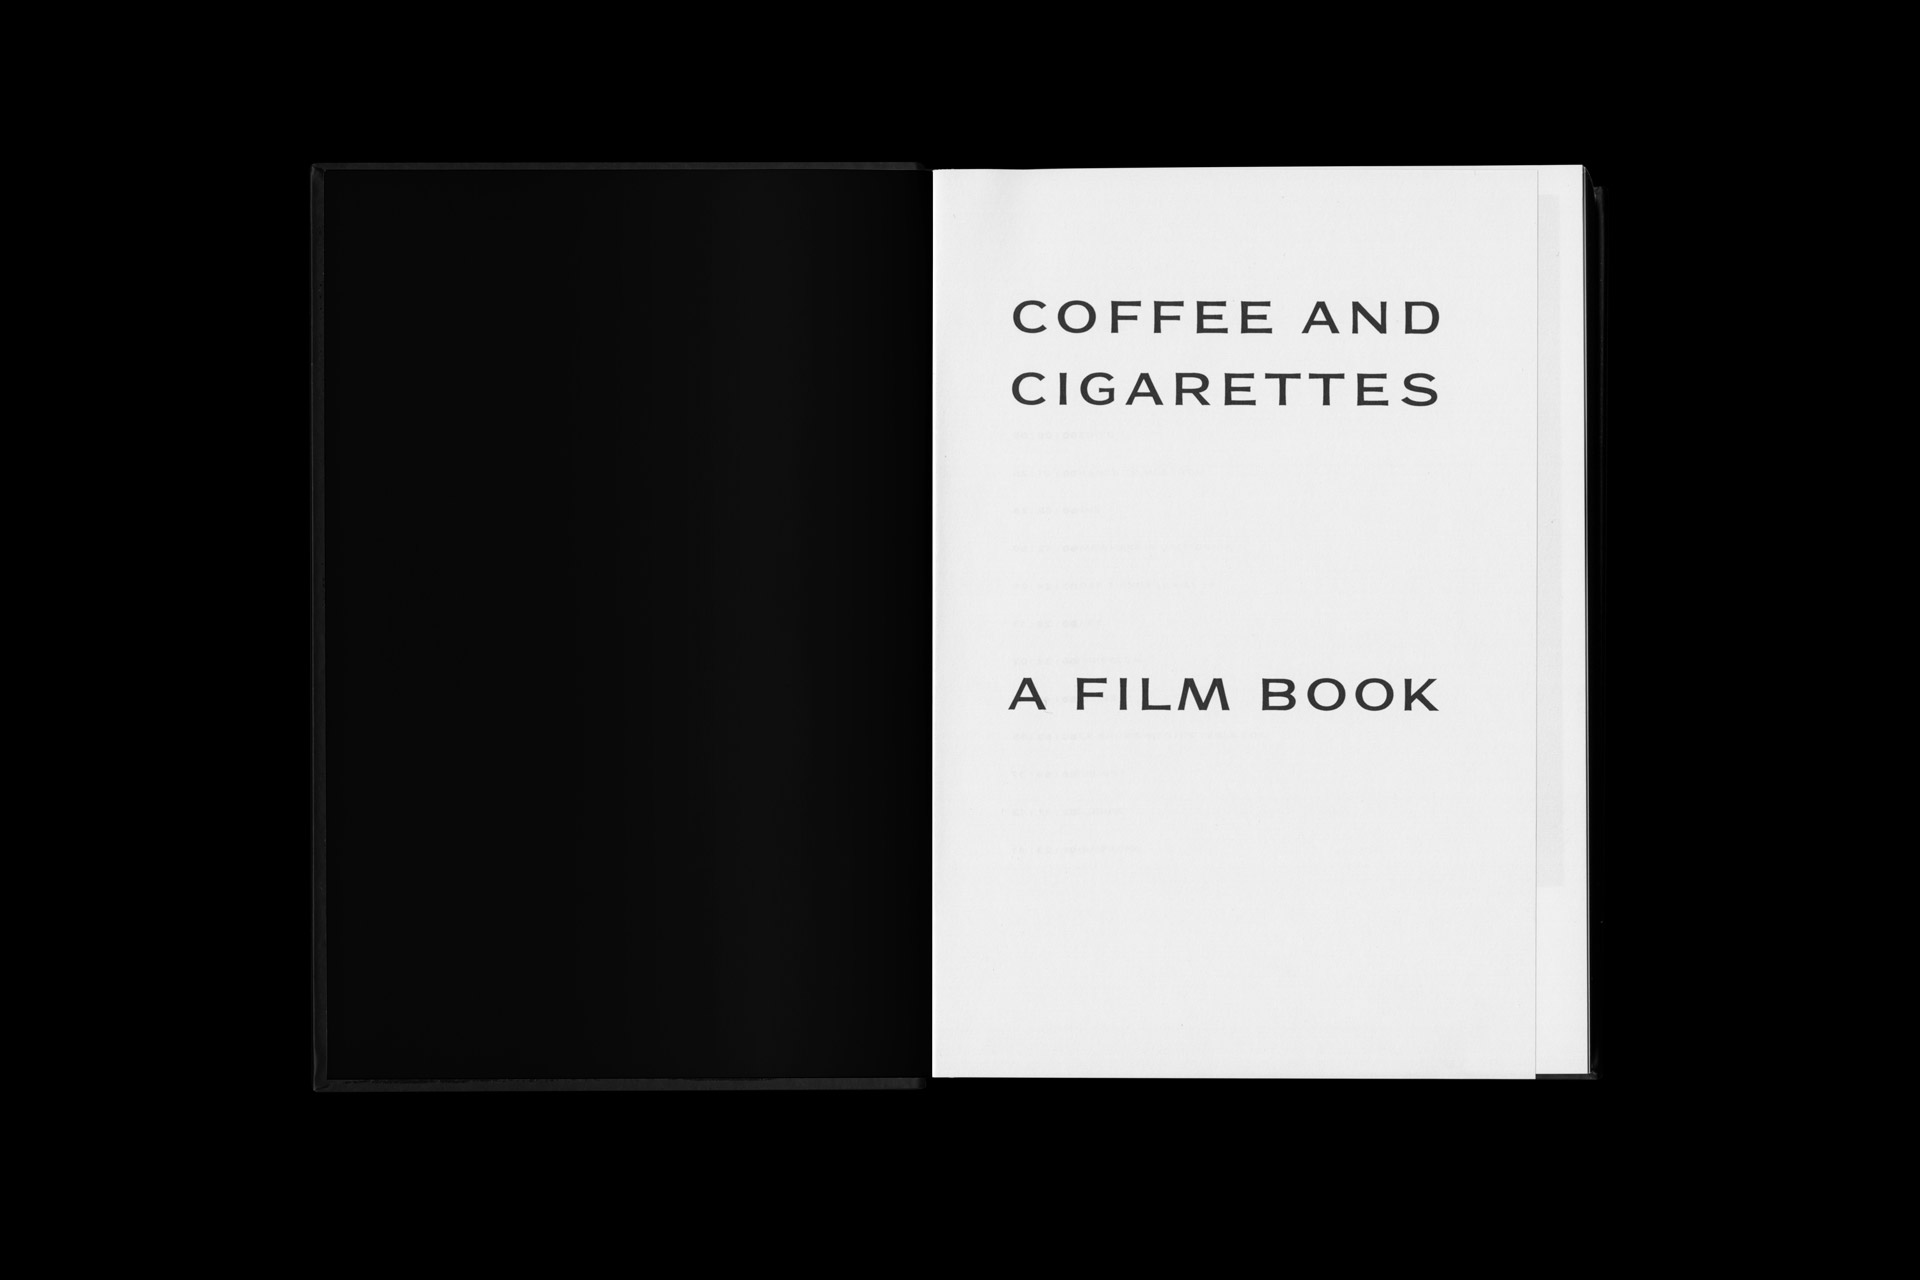 Gallery Coffee and Cigarettes book title